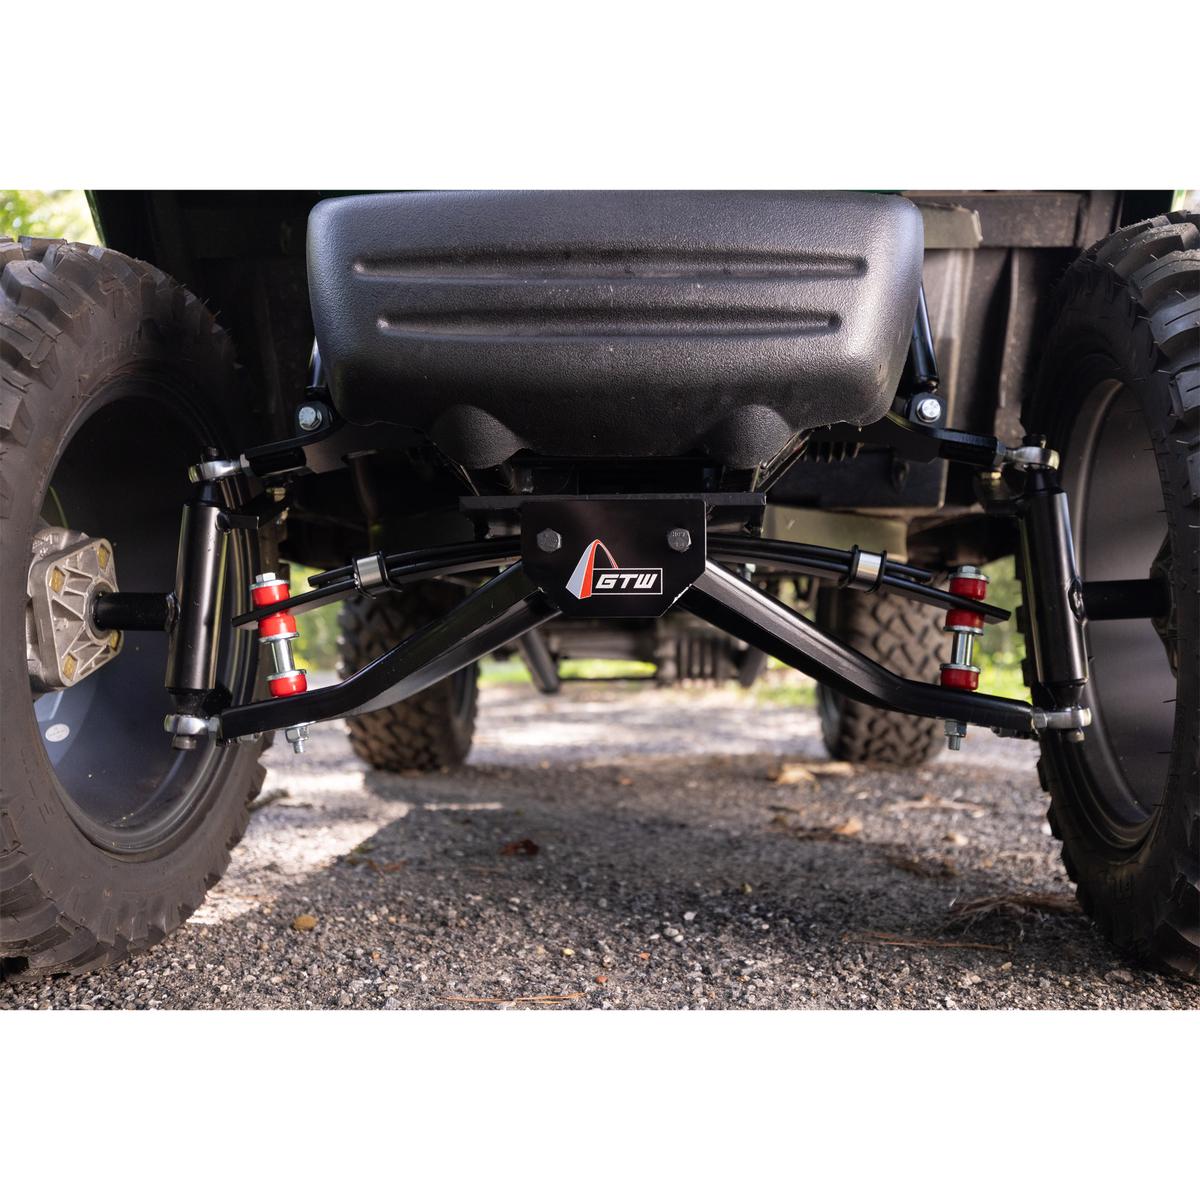 4” GTW Double A-Arm Lift Kit for Gas Yamaha Drive2 with Independent Rear Suspension